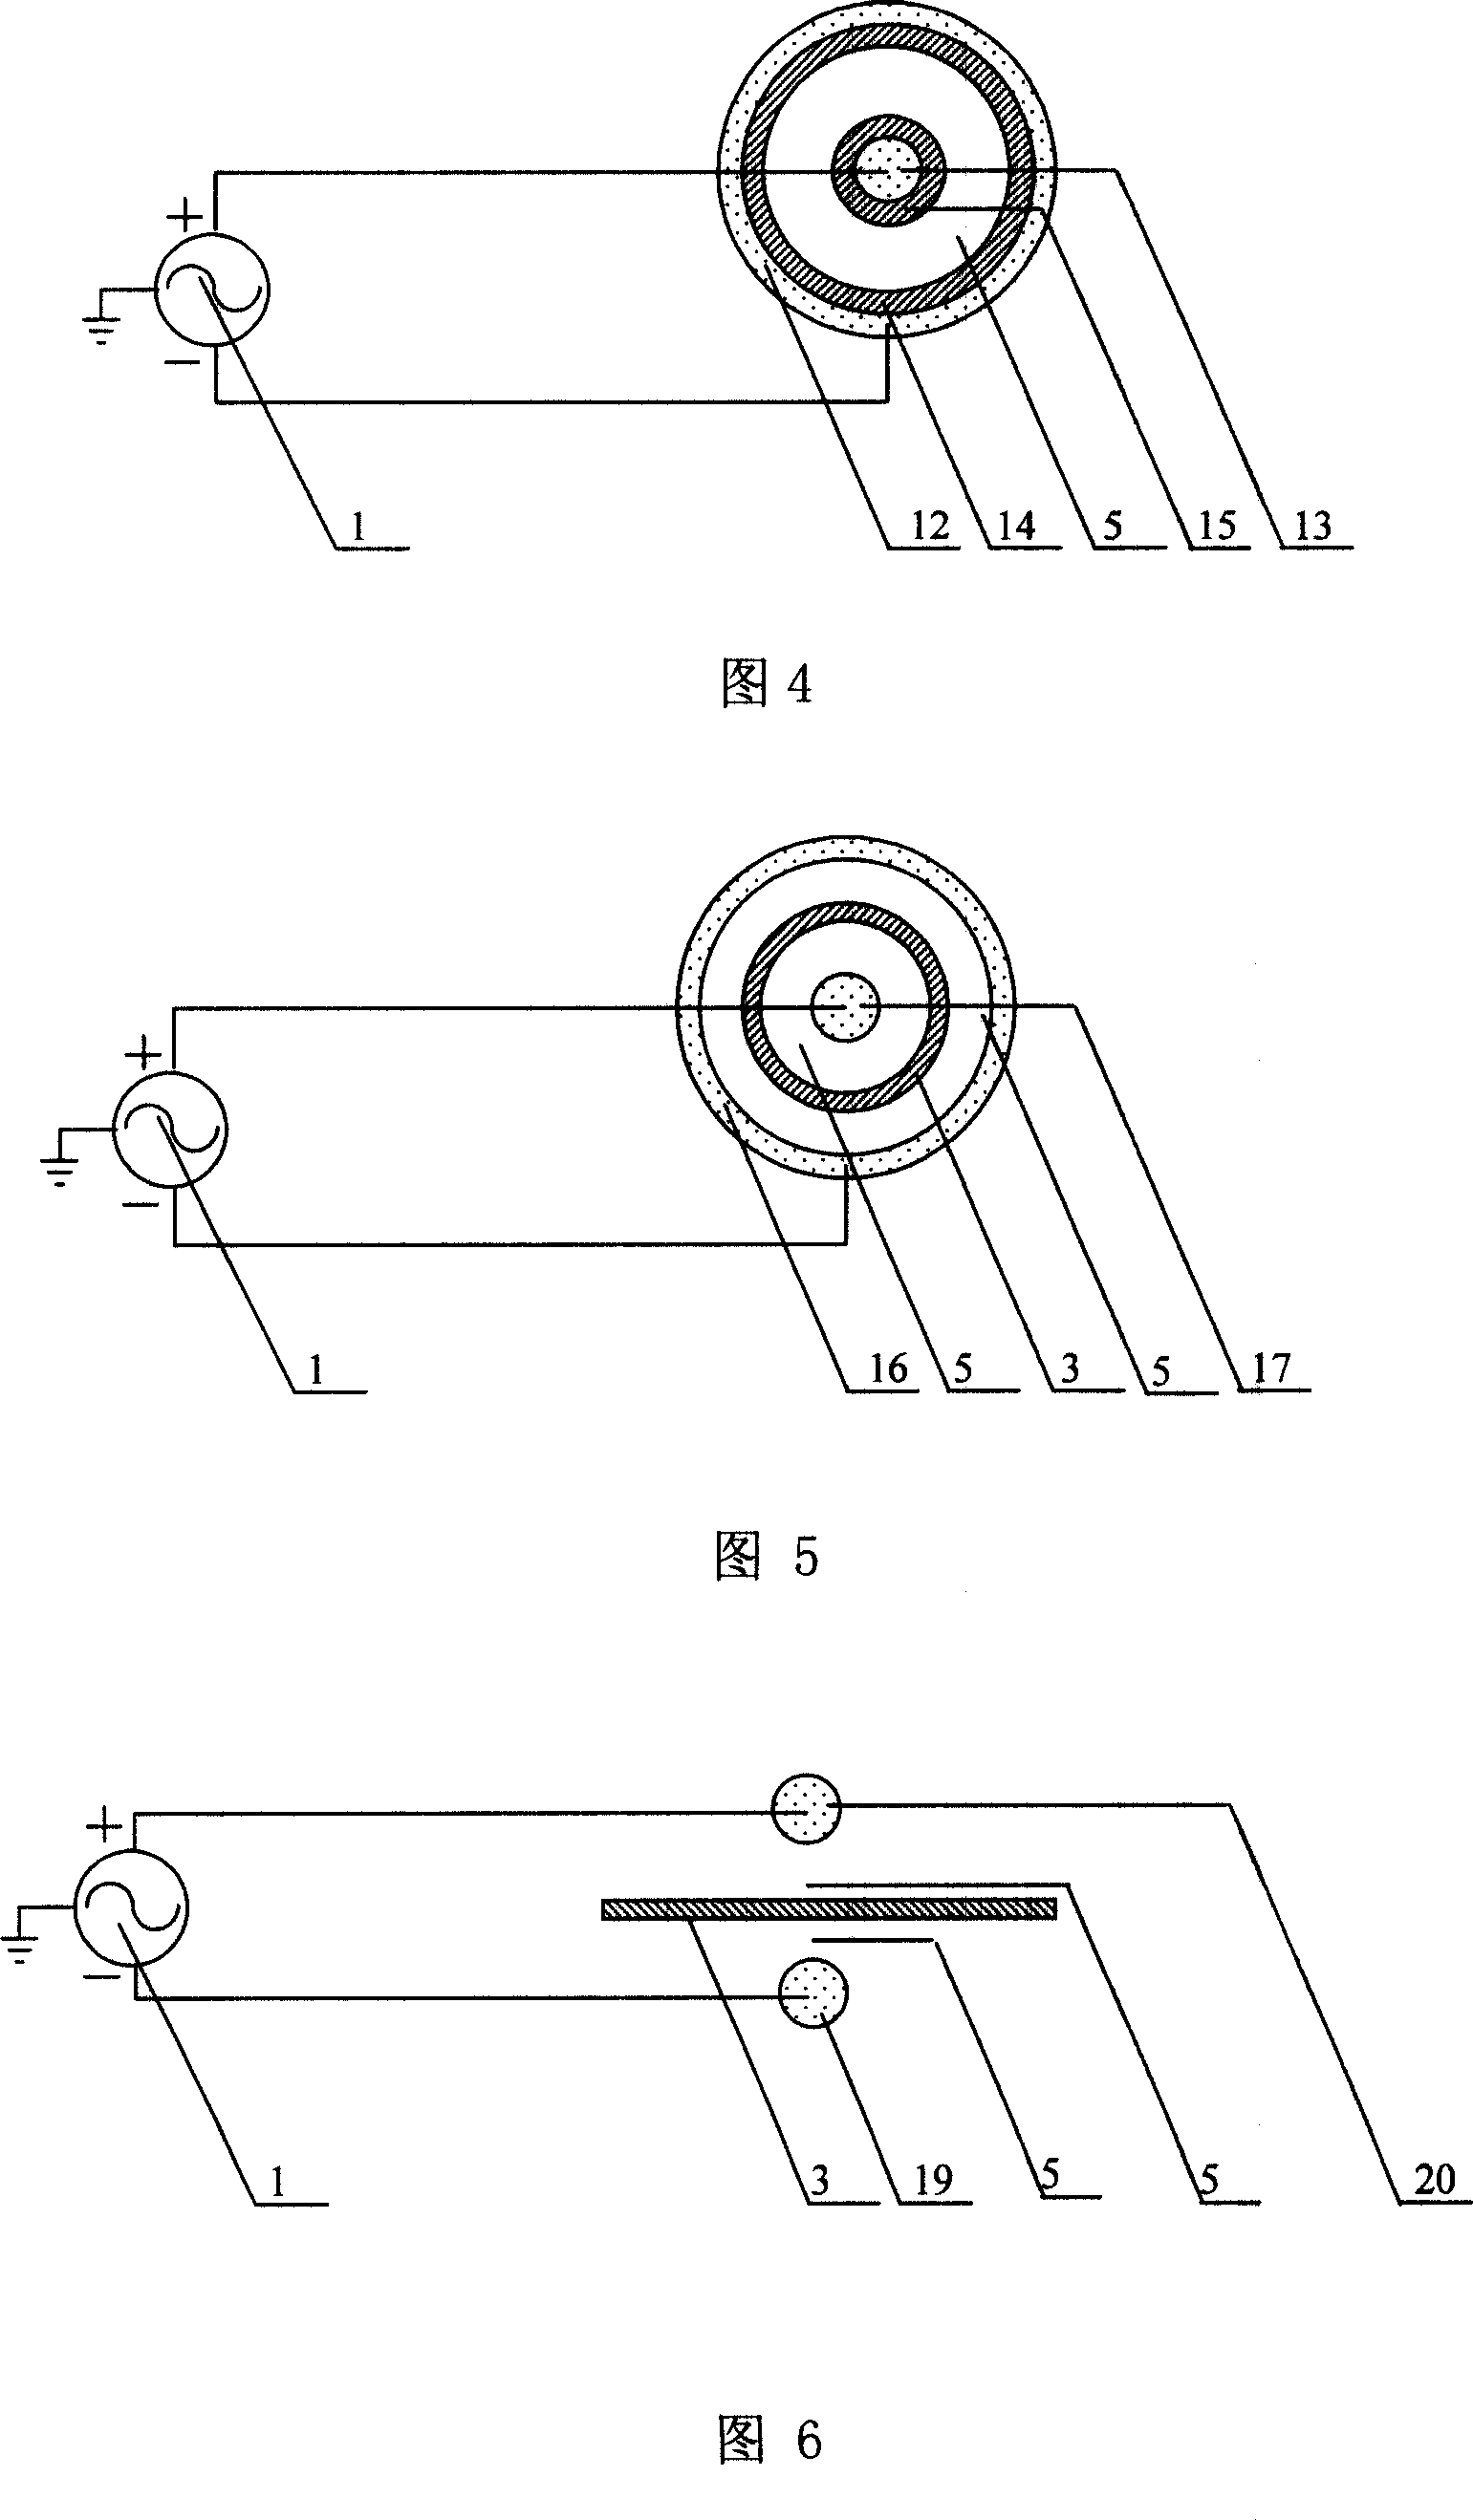 Differential feed dielectric barrier discharging low-temperature plasma device